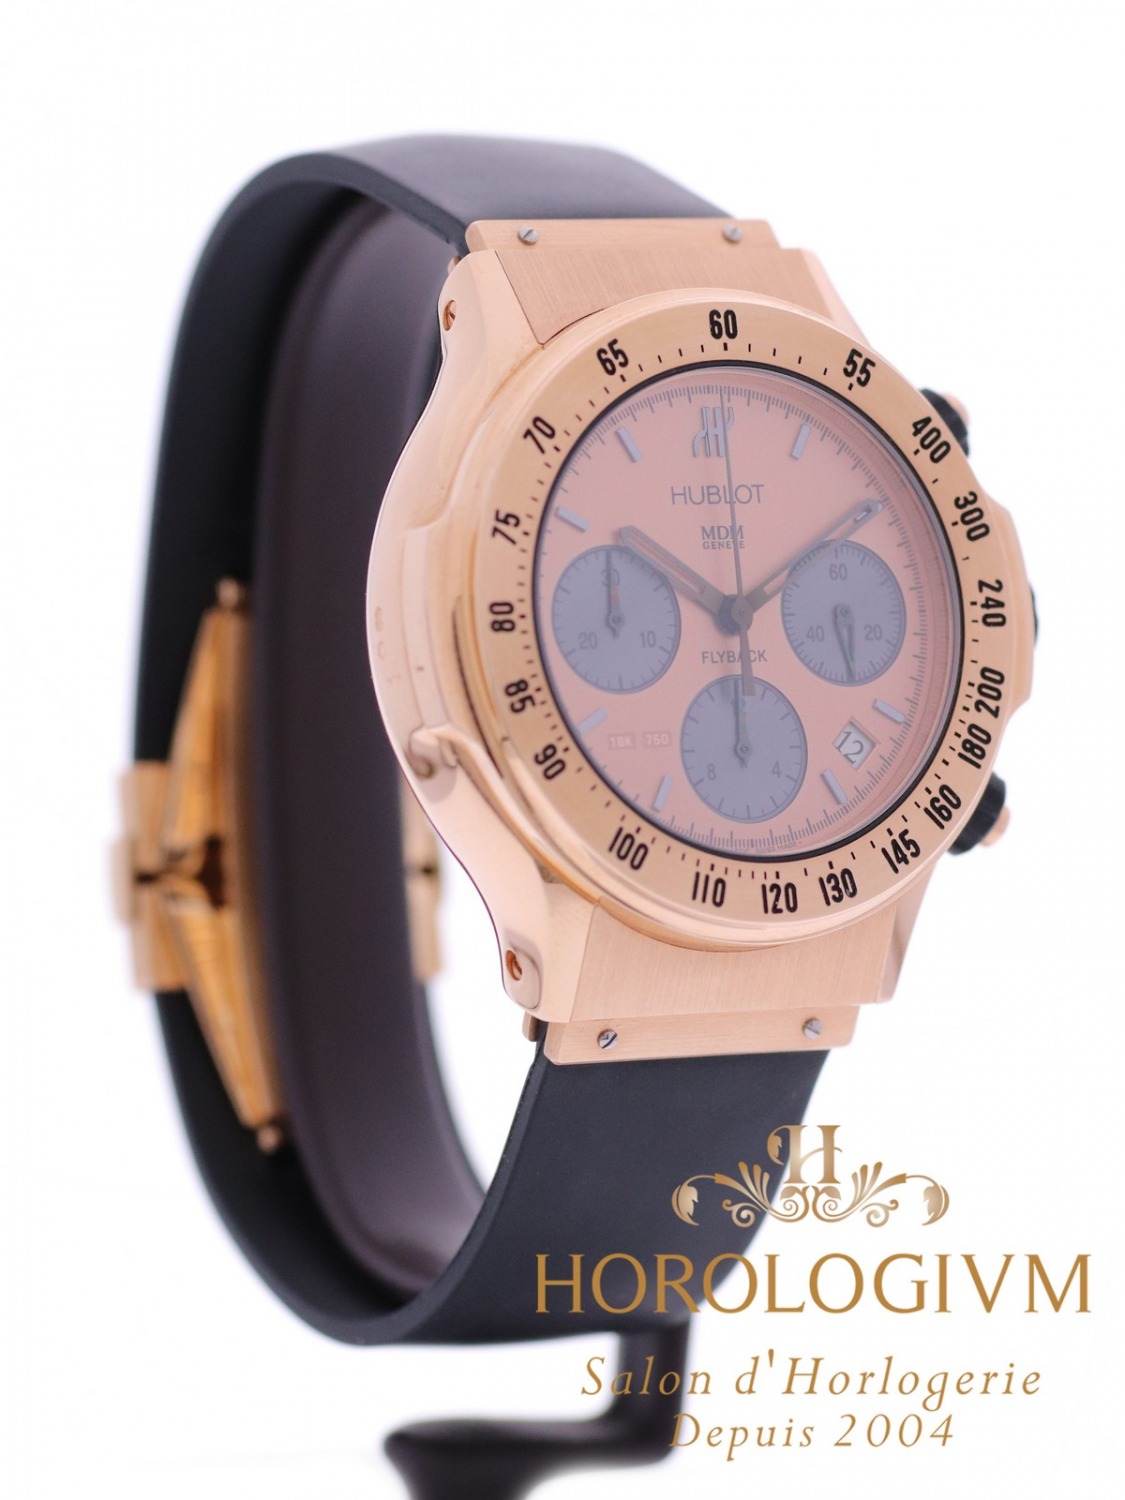 Hublot Super B MDM Flyback Chronograph - Limited Edition of 100 Pieces watch, rose gold